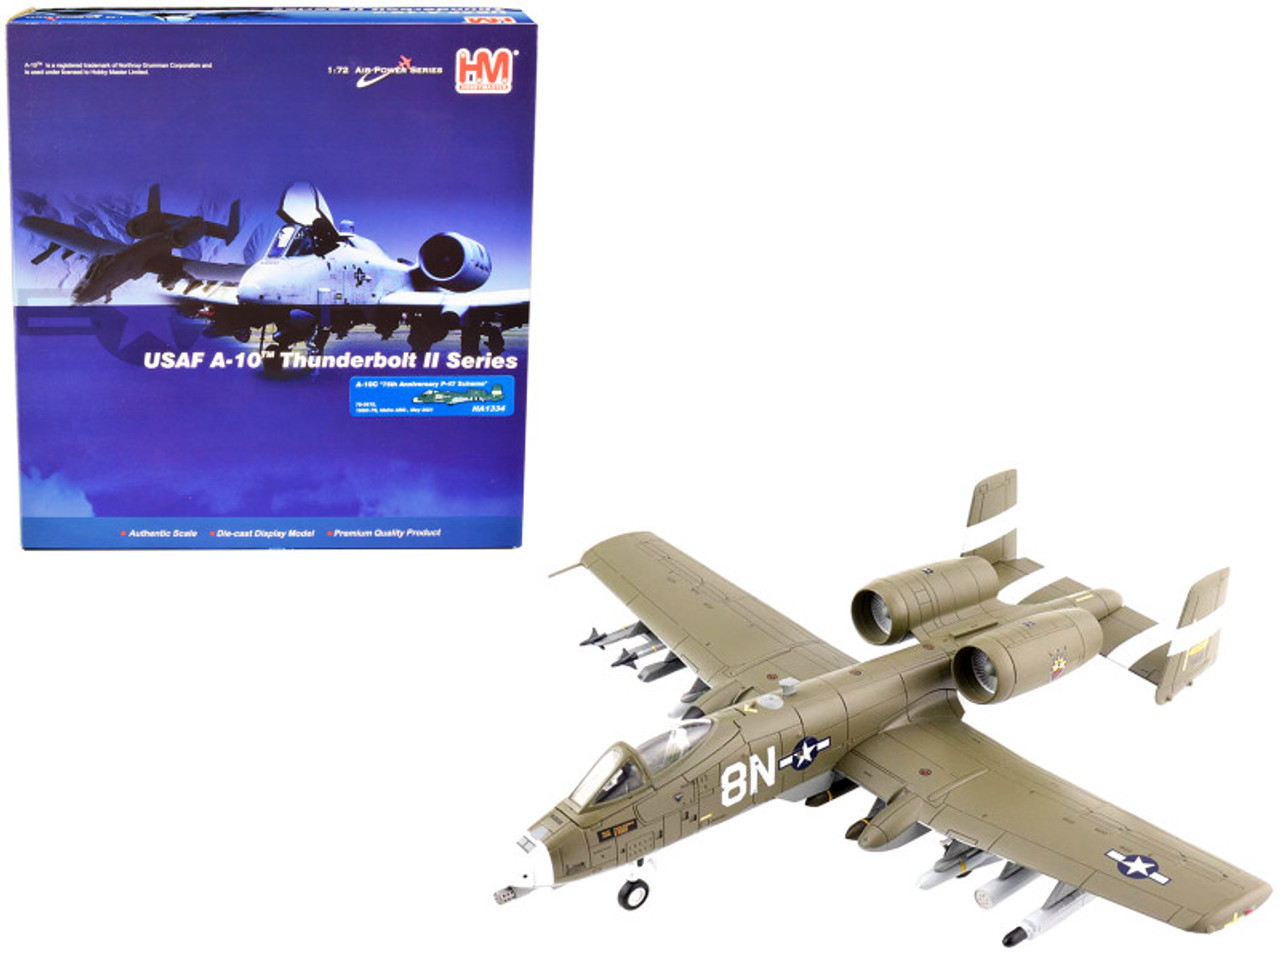 USAF A-10C Thunderbolt II Aircraft "75th Anniversary P-47 Scheme" "190th FS Idaho ANG" (May 2021) "Air Power Series" 1/72 Scale Model by Hobby Master